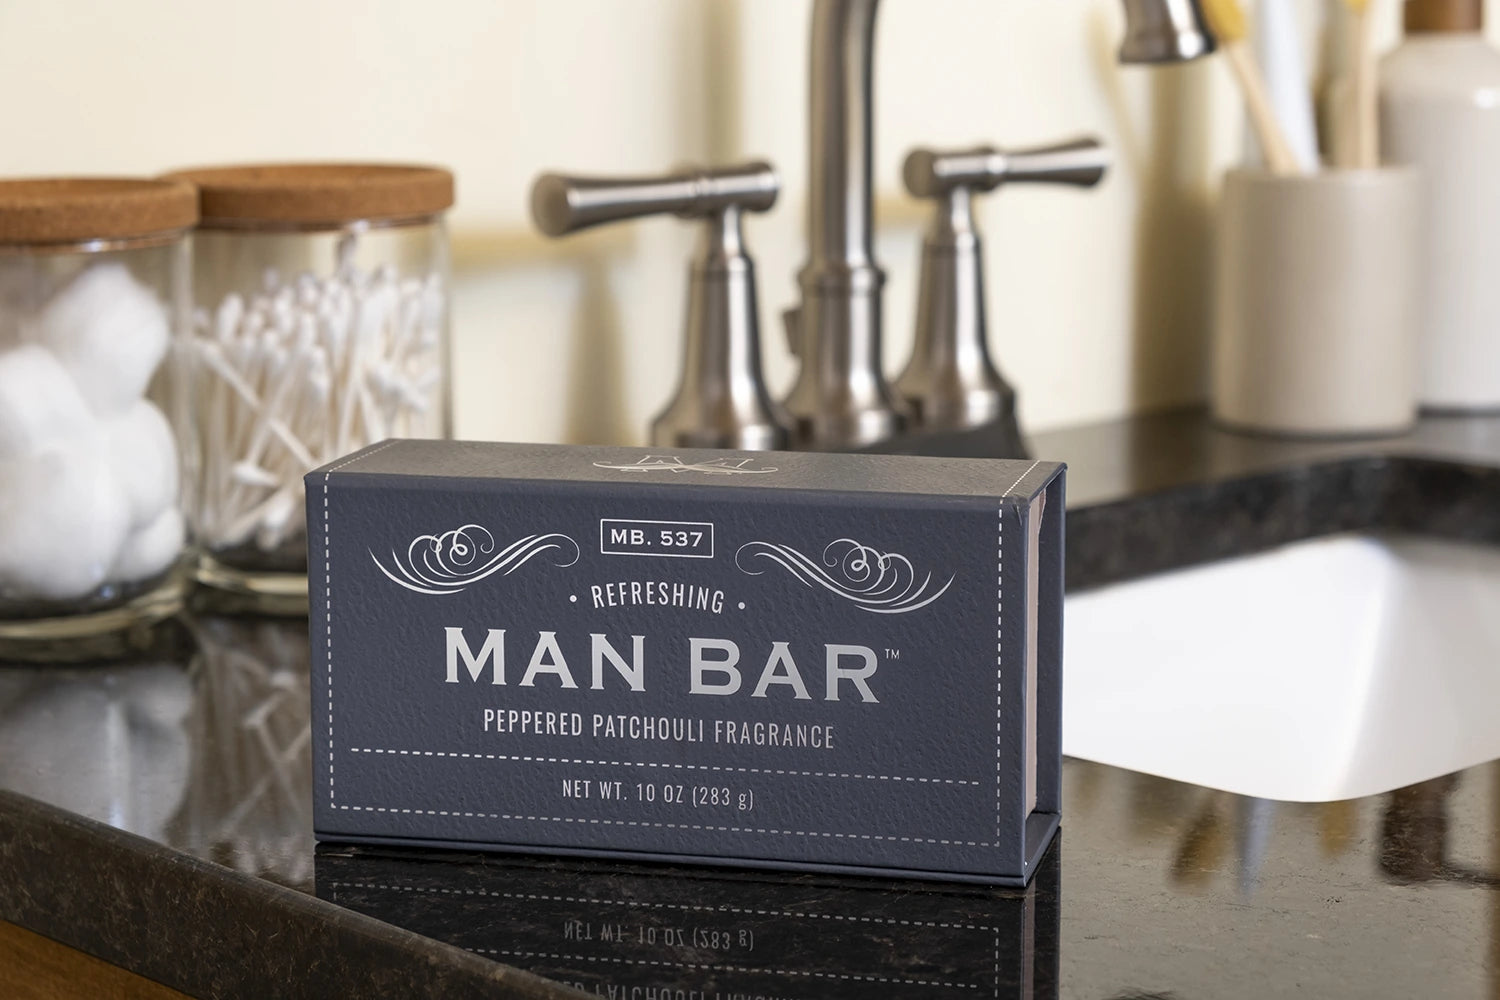 Man Bar Peppered Patchouli box resting on a bathroom sink counter